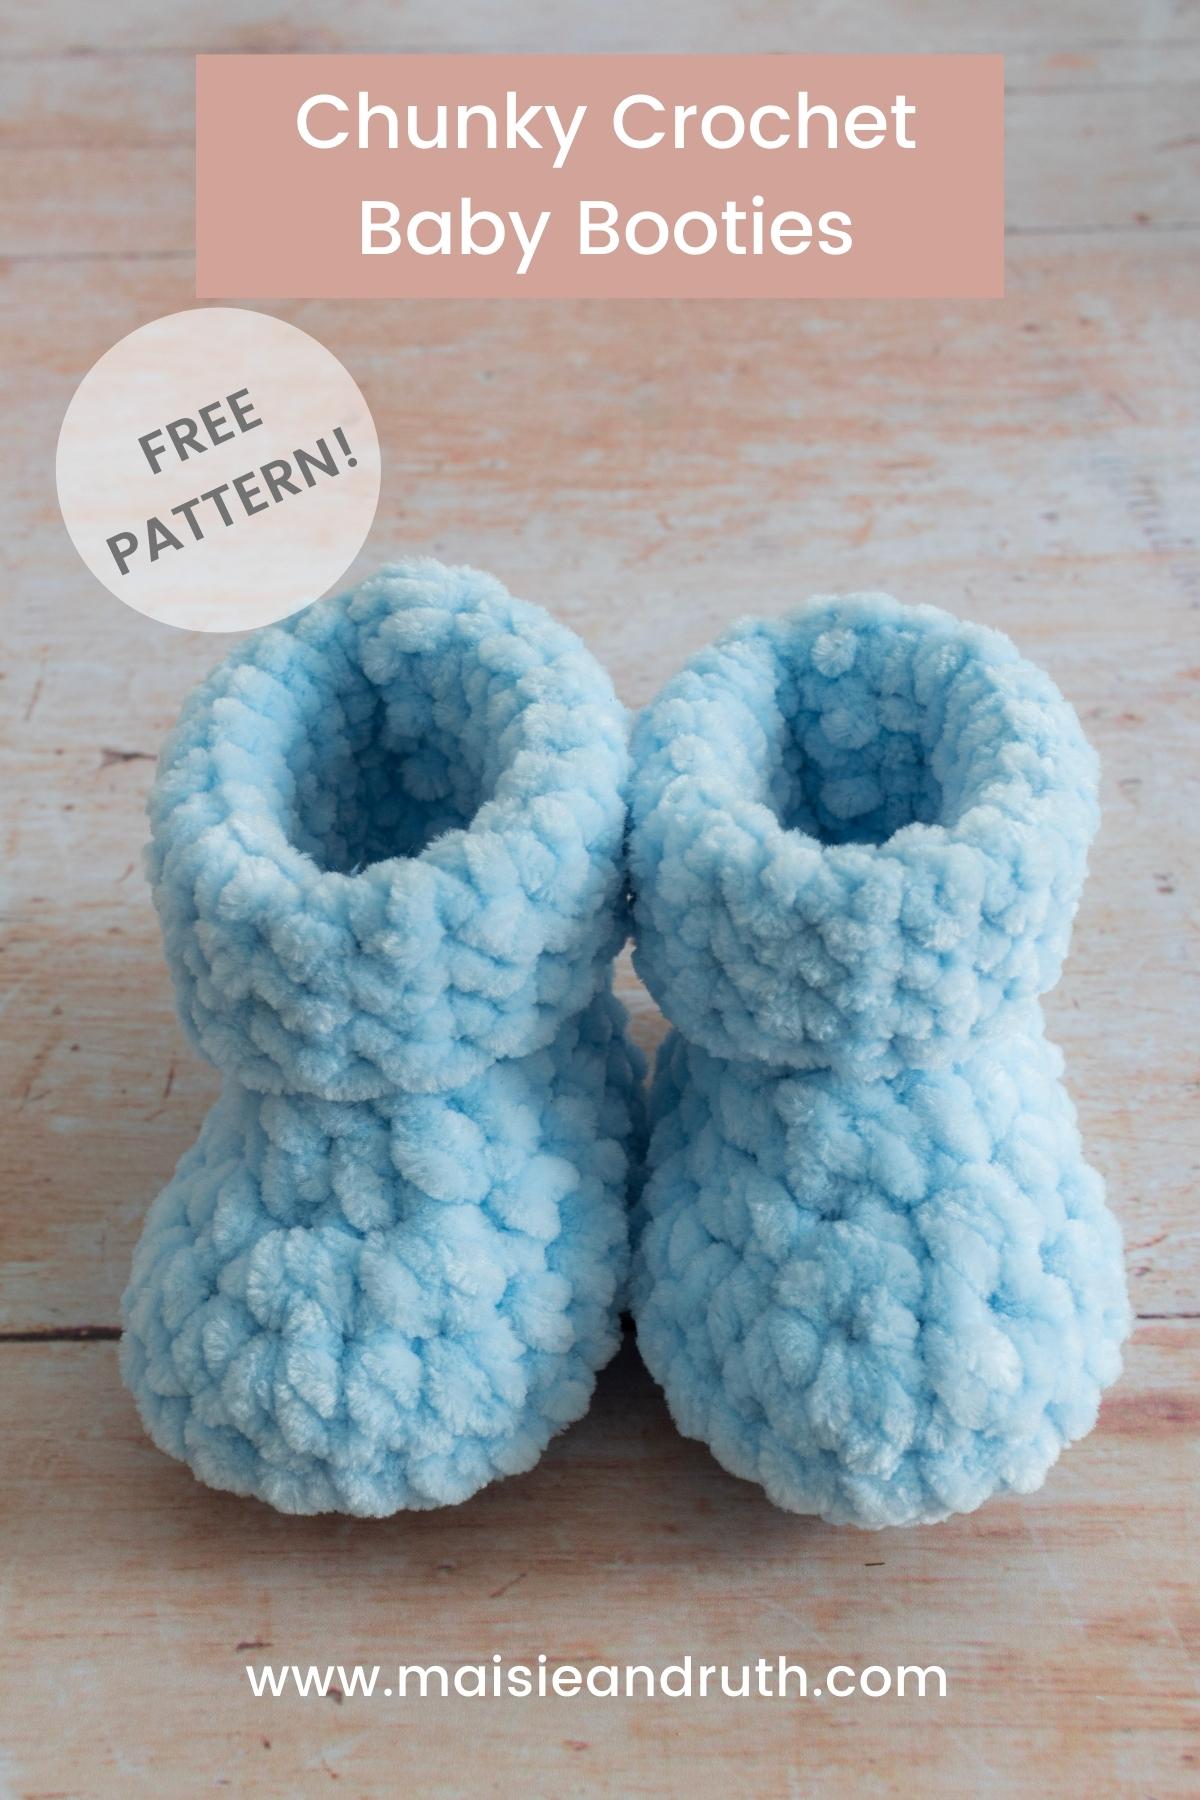 Crochet Baby Shoes newborn to 3 months old size 8cm Crochet Baby Booties